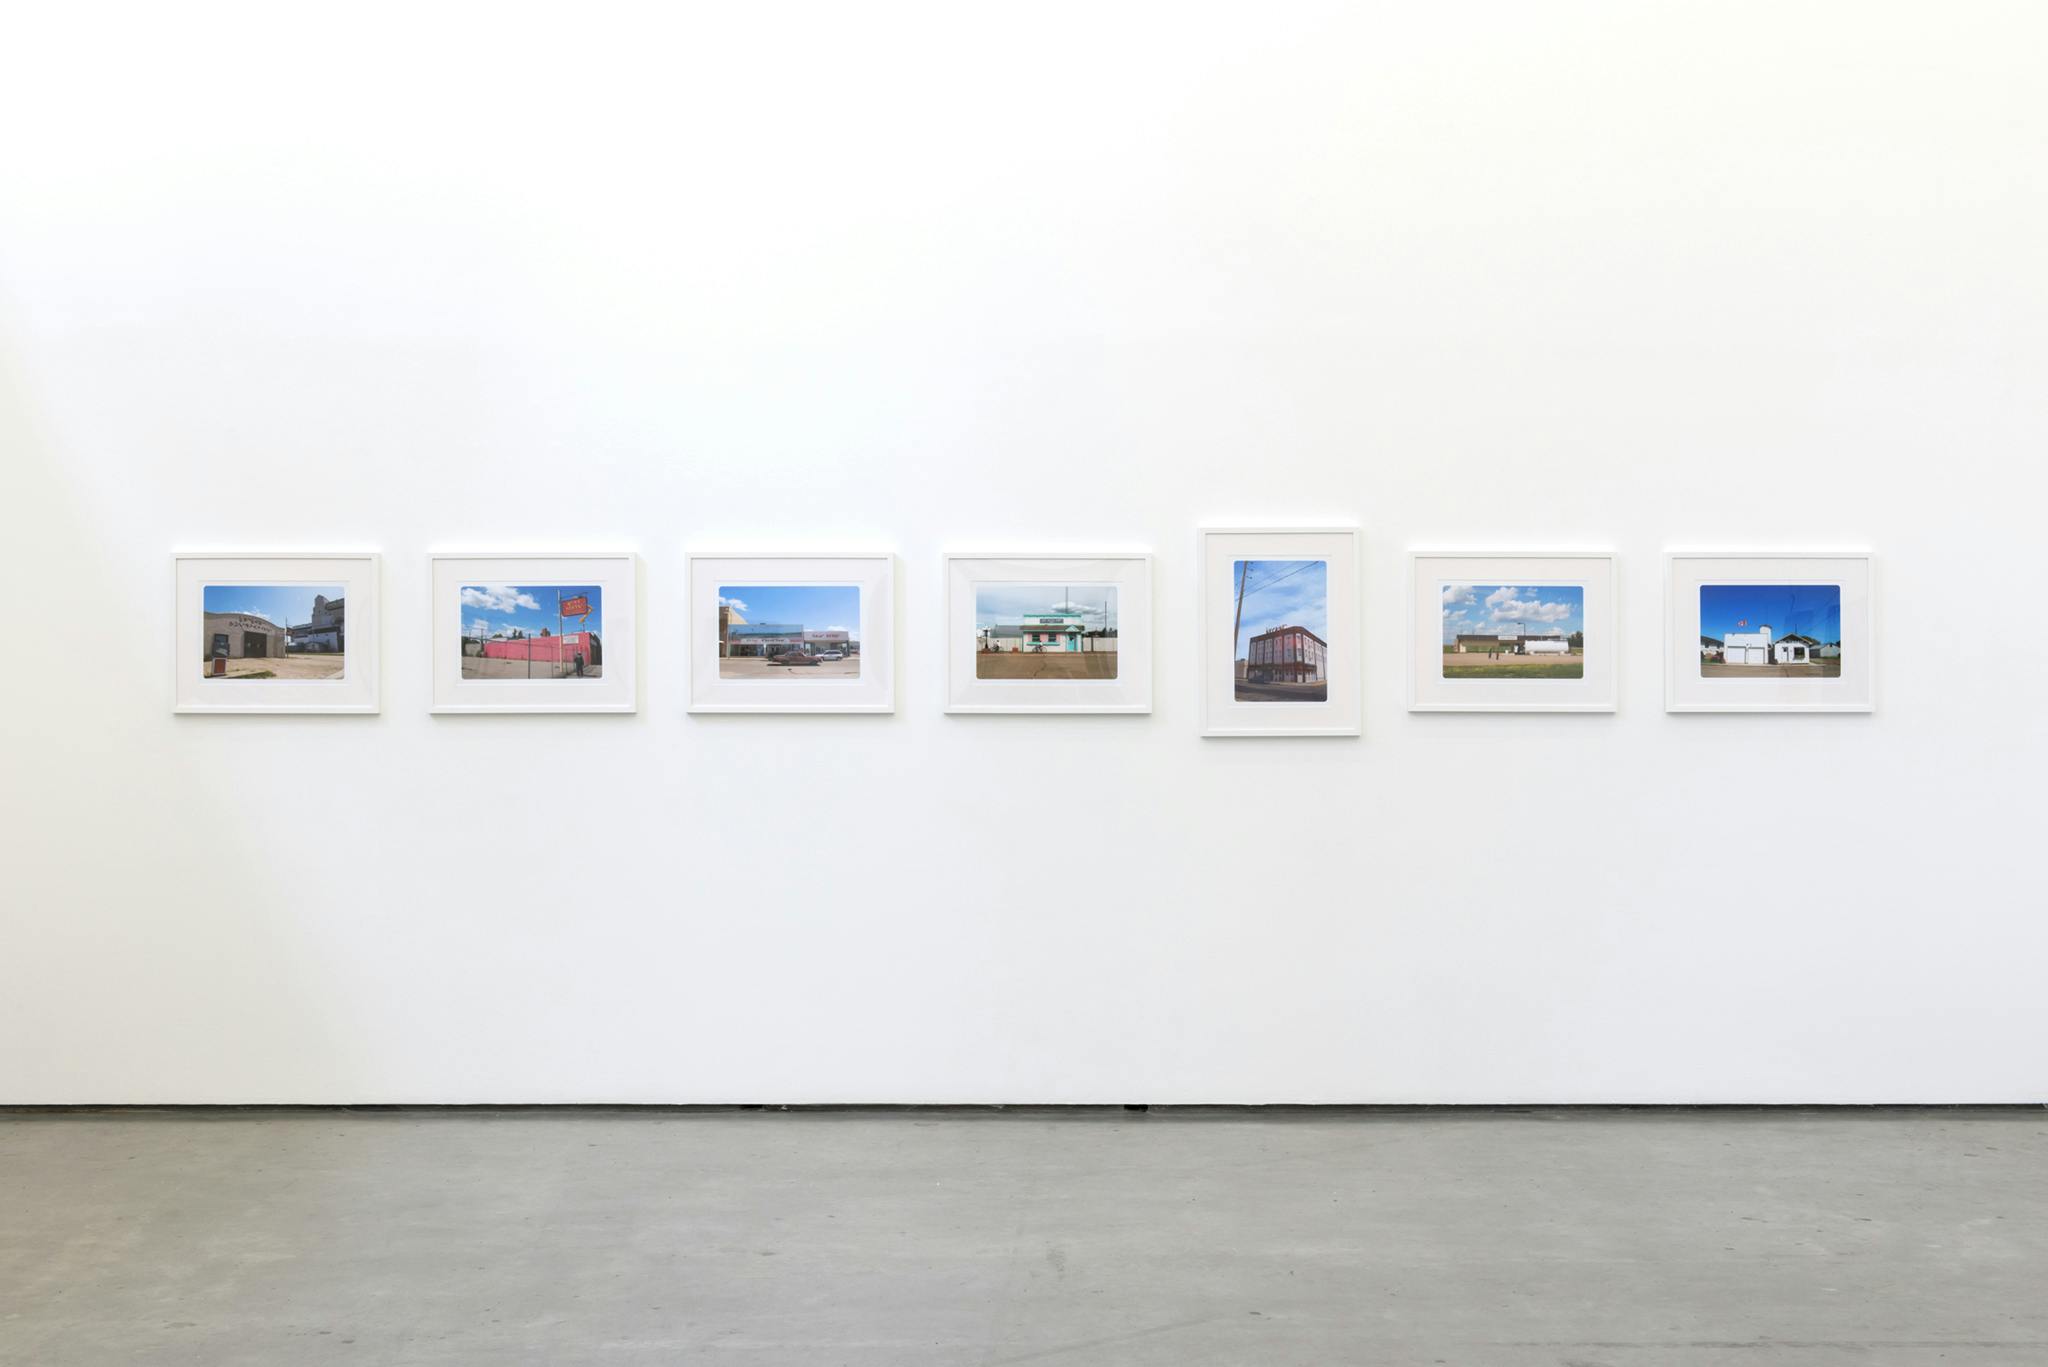 Seven framed photographs hang in a horizontal line on the wall of a gallery. The images depict various Saskatchewan rural buildings with signs in Cree syllabics, all with a blue sky above. 